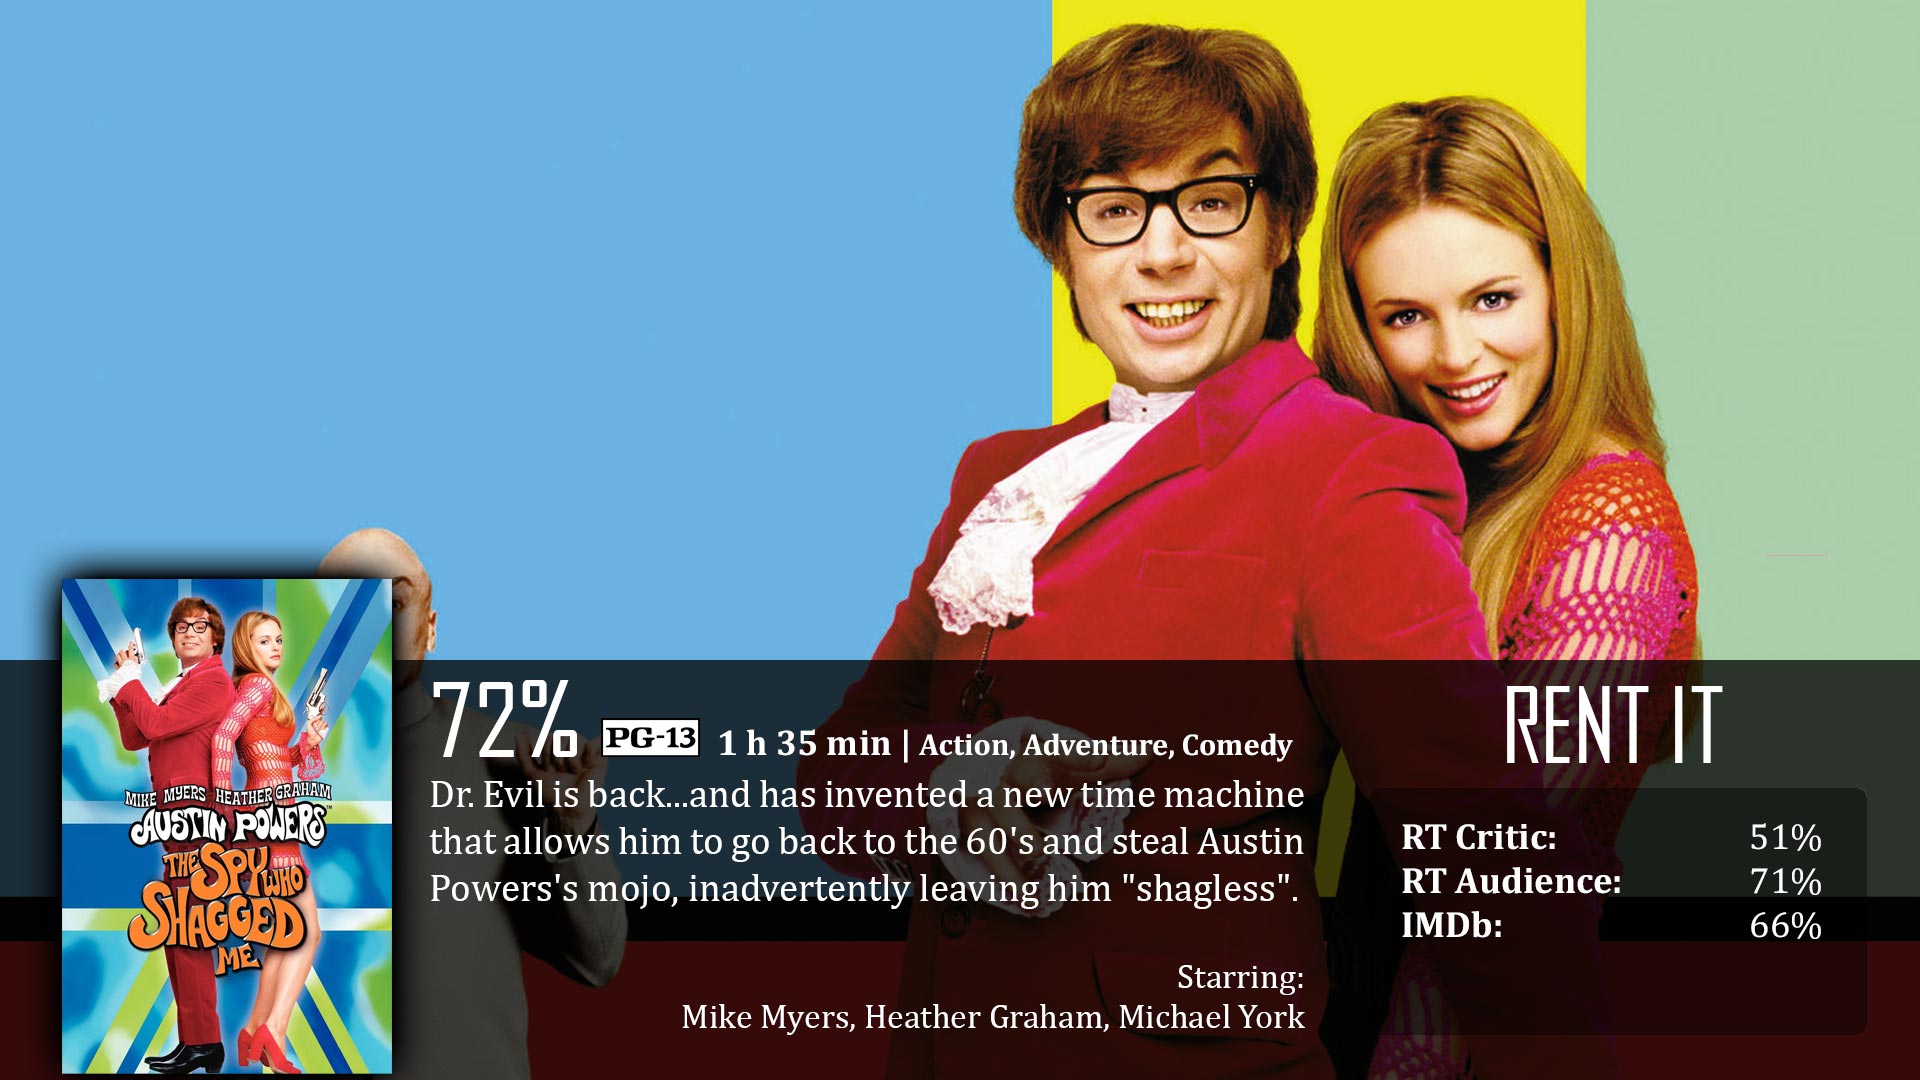 High Resolution Wallpaper | Austin Powers: The Spy Who Shagged Me 1920x1080 px